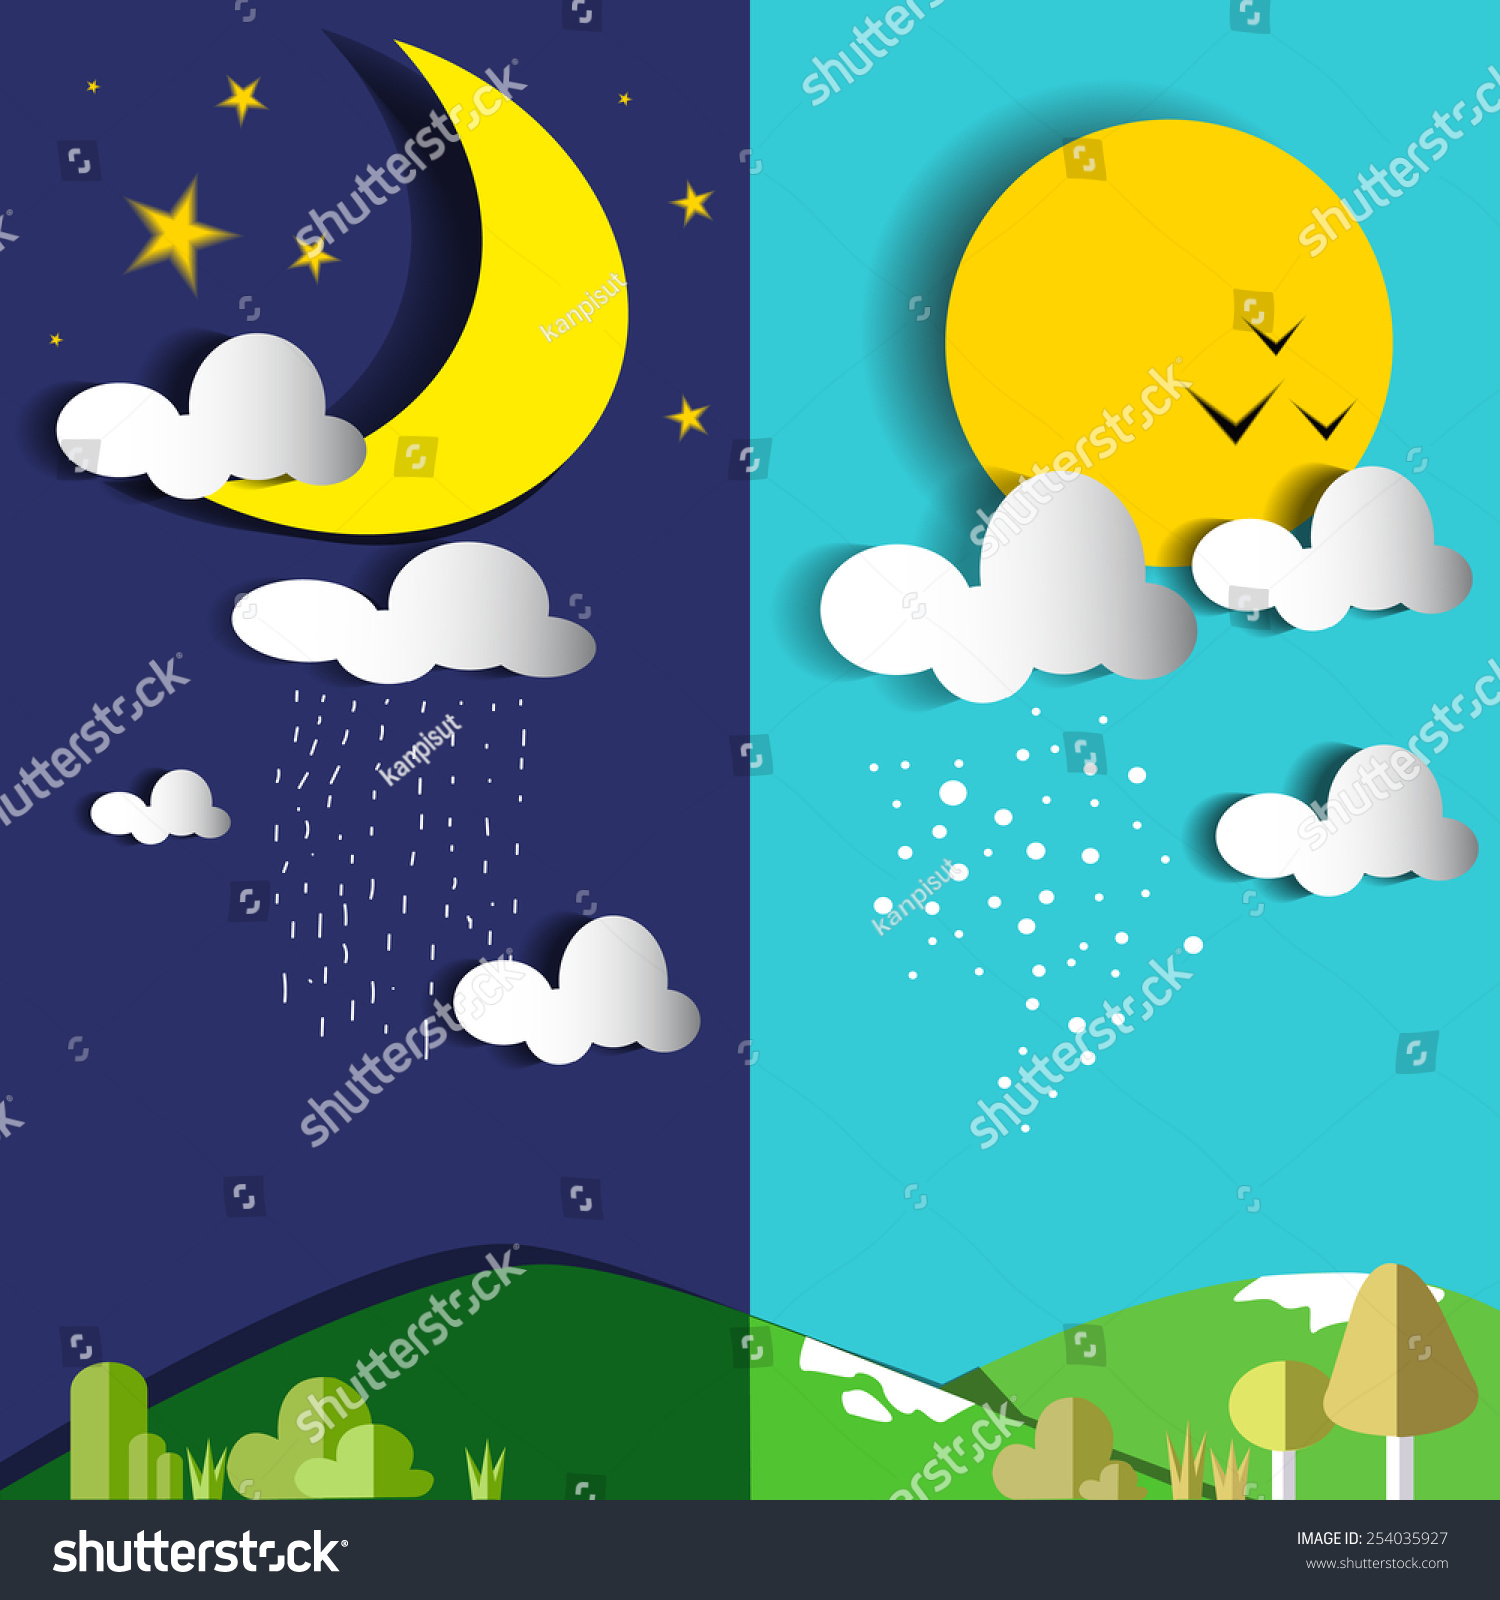 day and night clipart black and white - photo #11